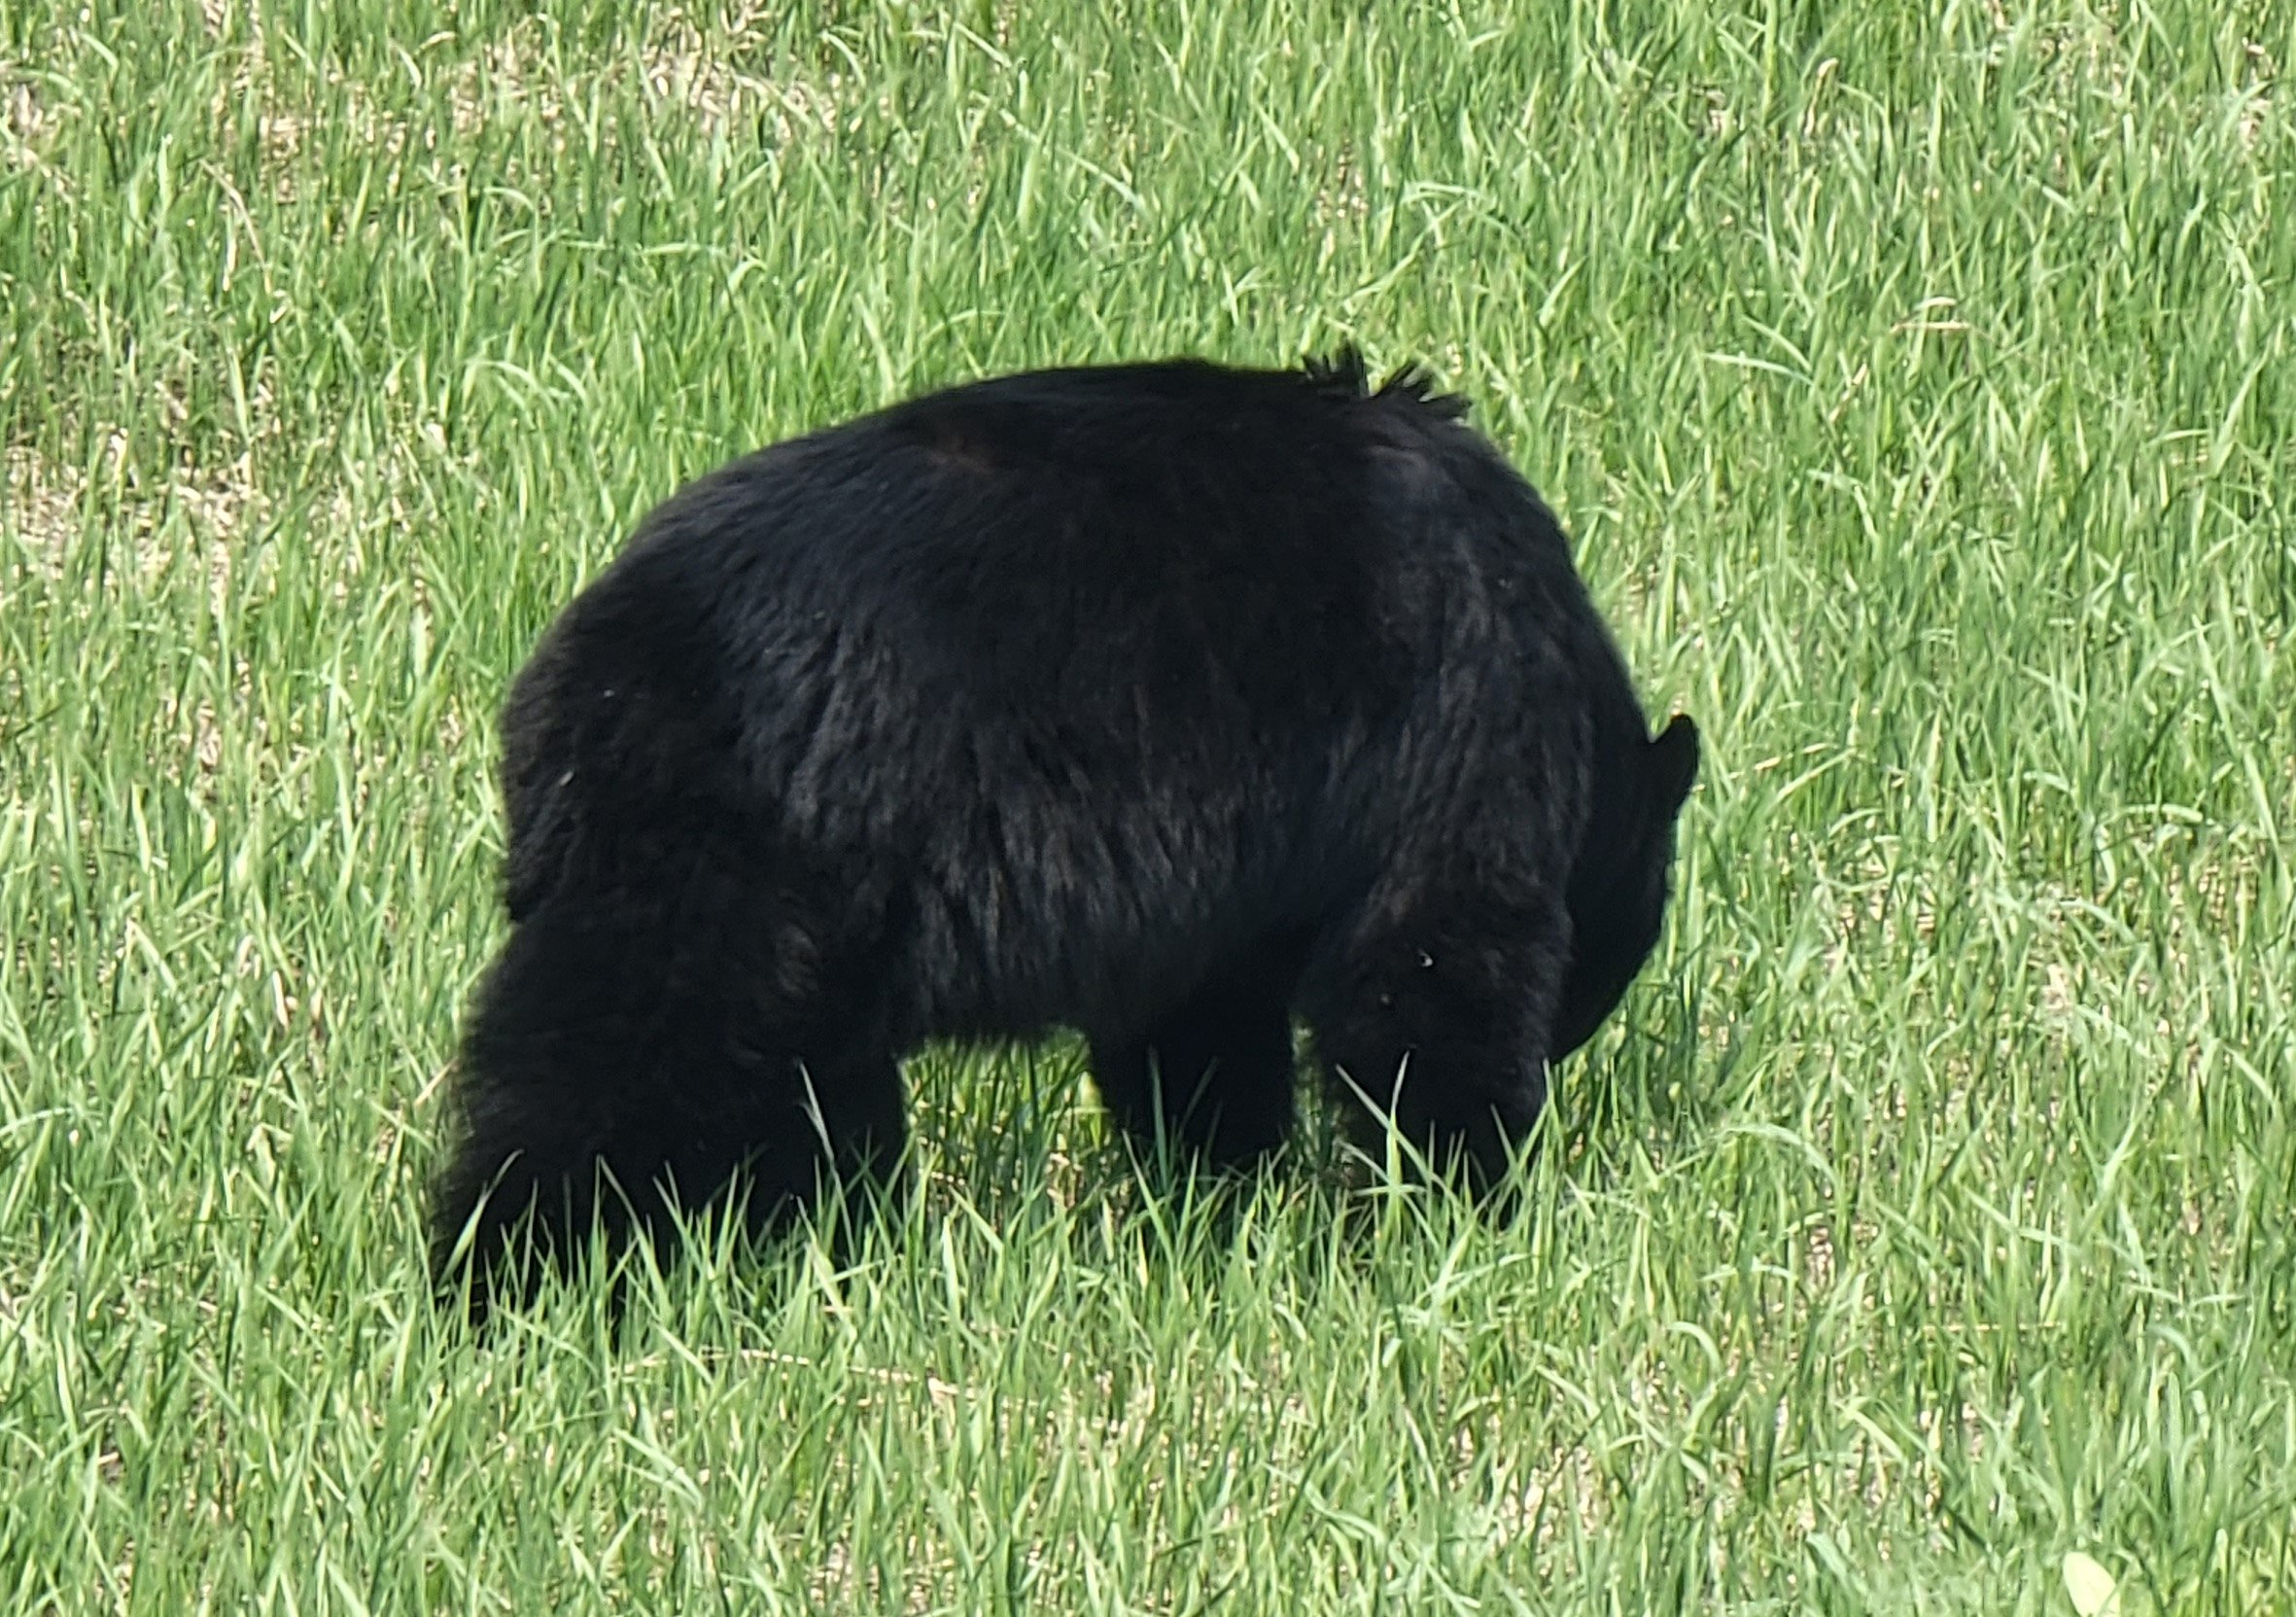 Saw another chill bear just eating some grass. I really want to pet them, they look so fluffy.